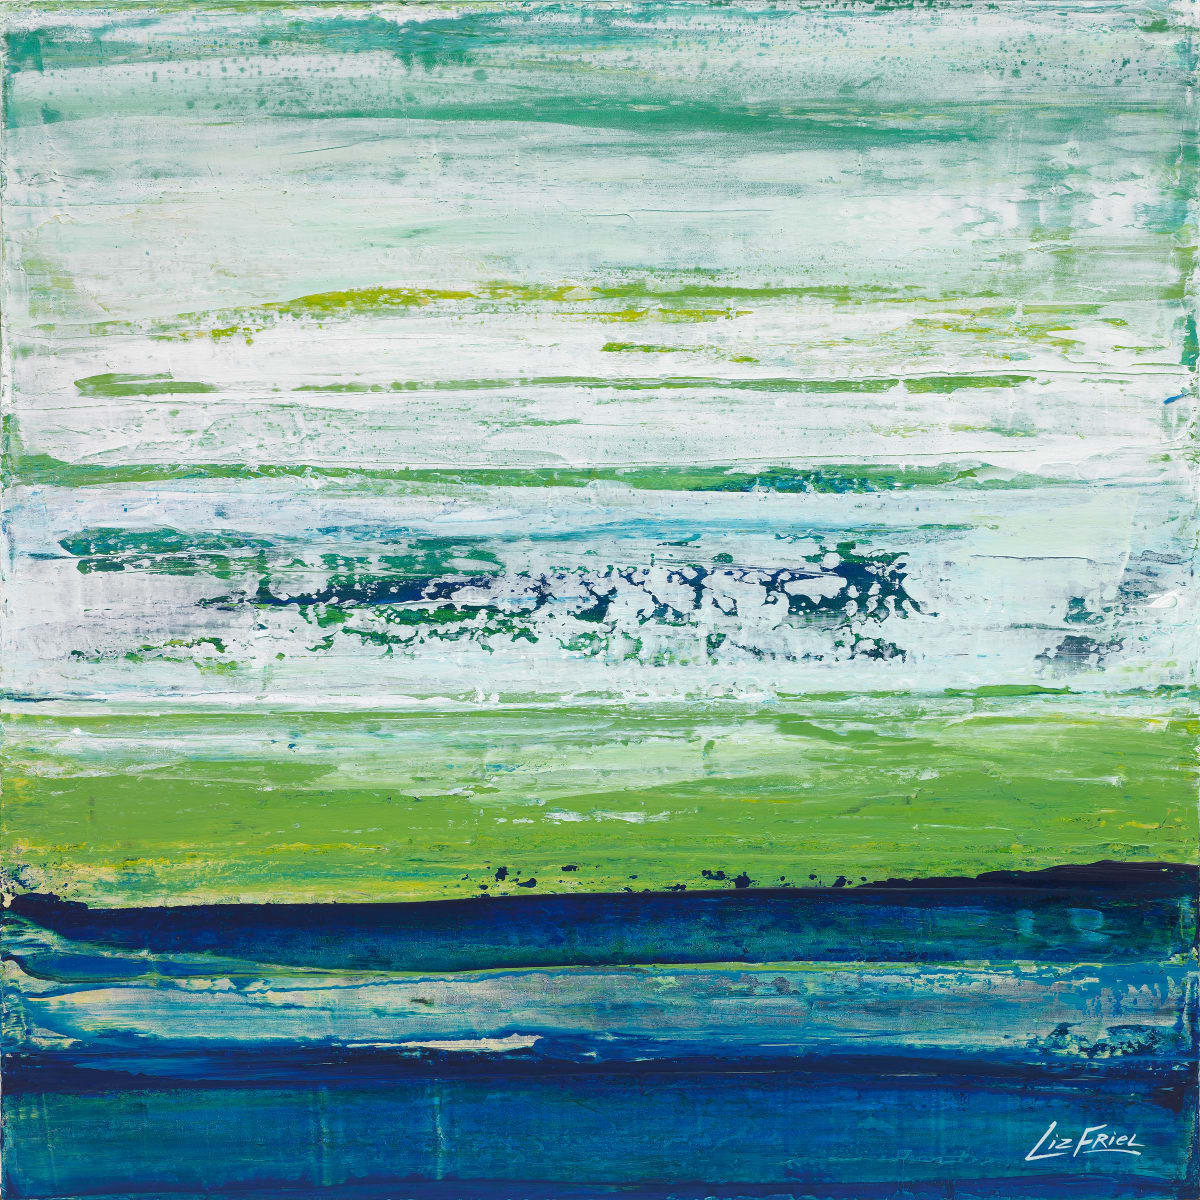 Closeout by Liz Friel  Image: Closeout by L.Friel
Abstract original 24x24 on cradled panel / sold 